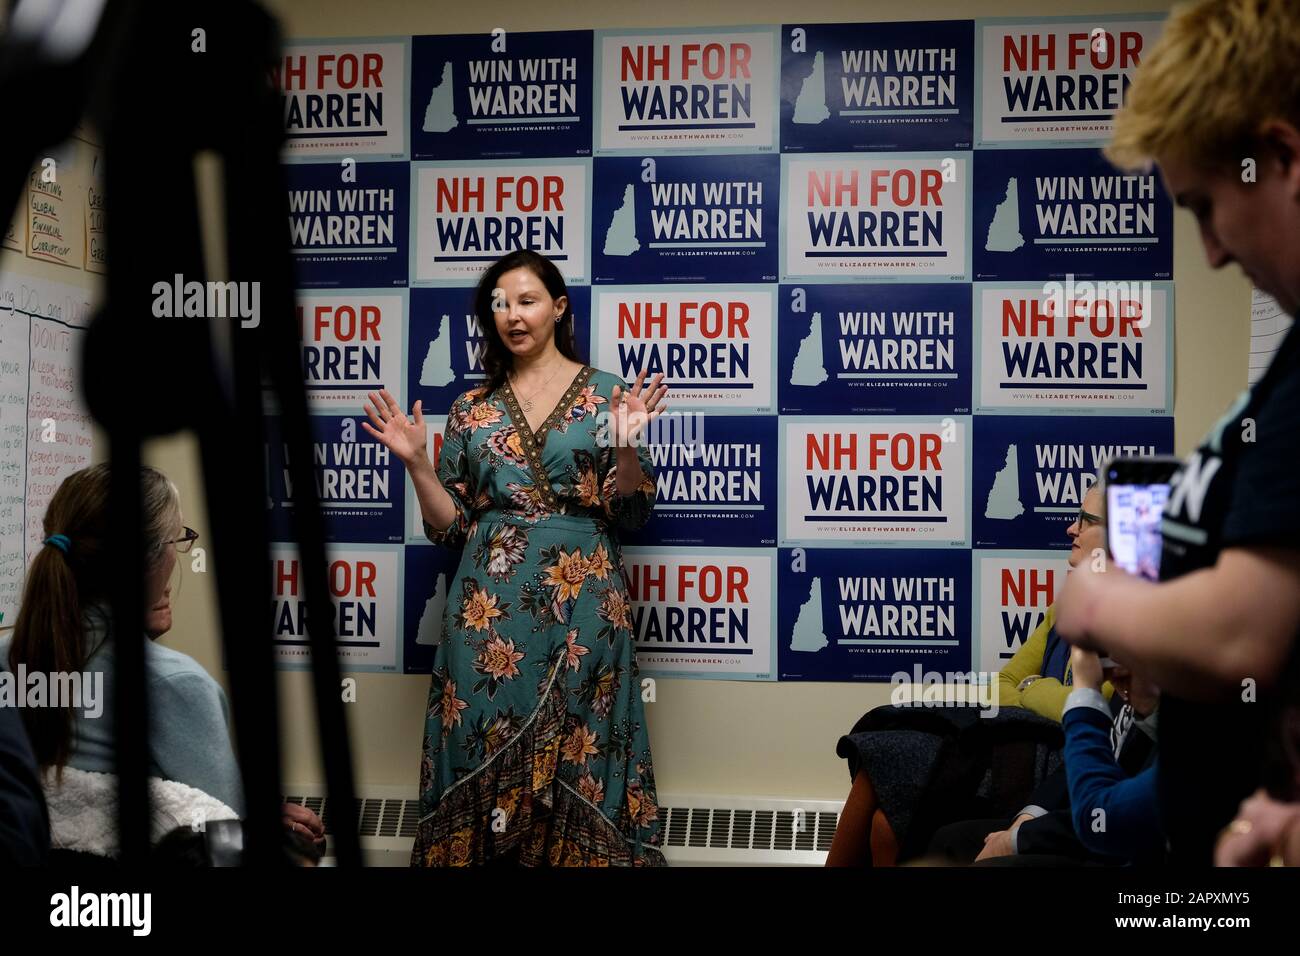 Lebanon, USA. 24th Jan, 2020. Actress and activist Ashley Judd campaigns for Elizabeth Warren in Lebanon. Credit: SOPA Images Limited/Alamy Live News Stock Photo